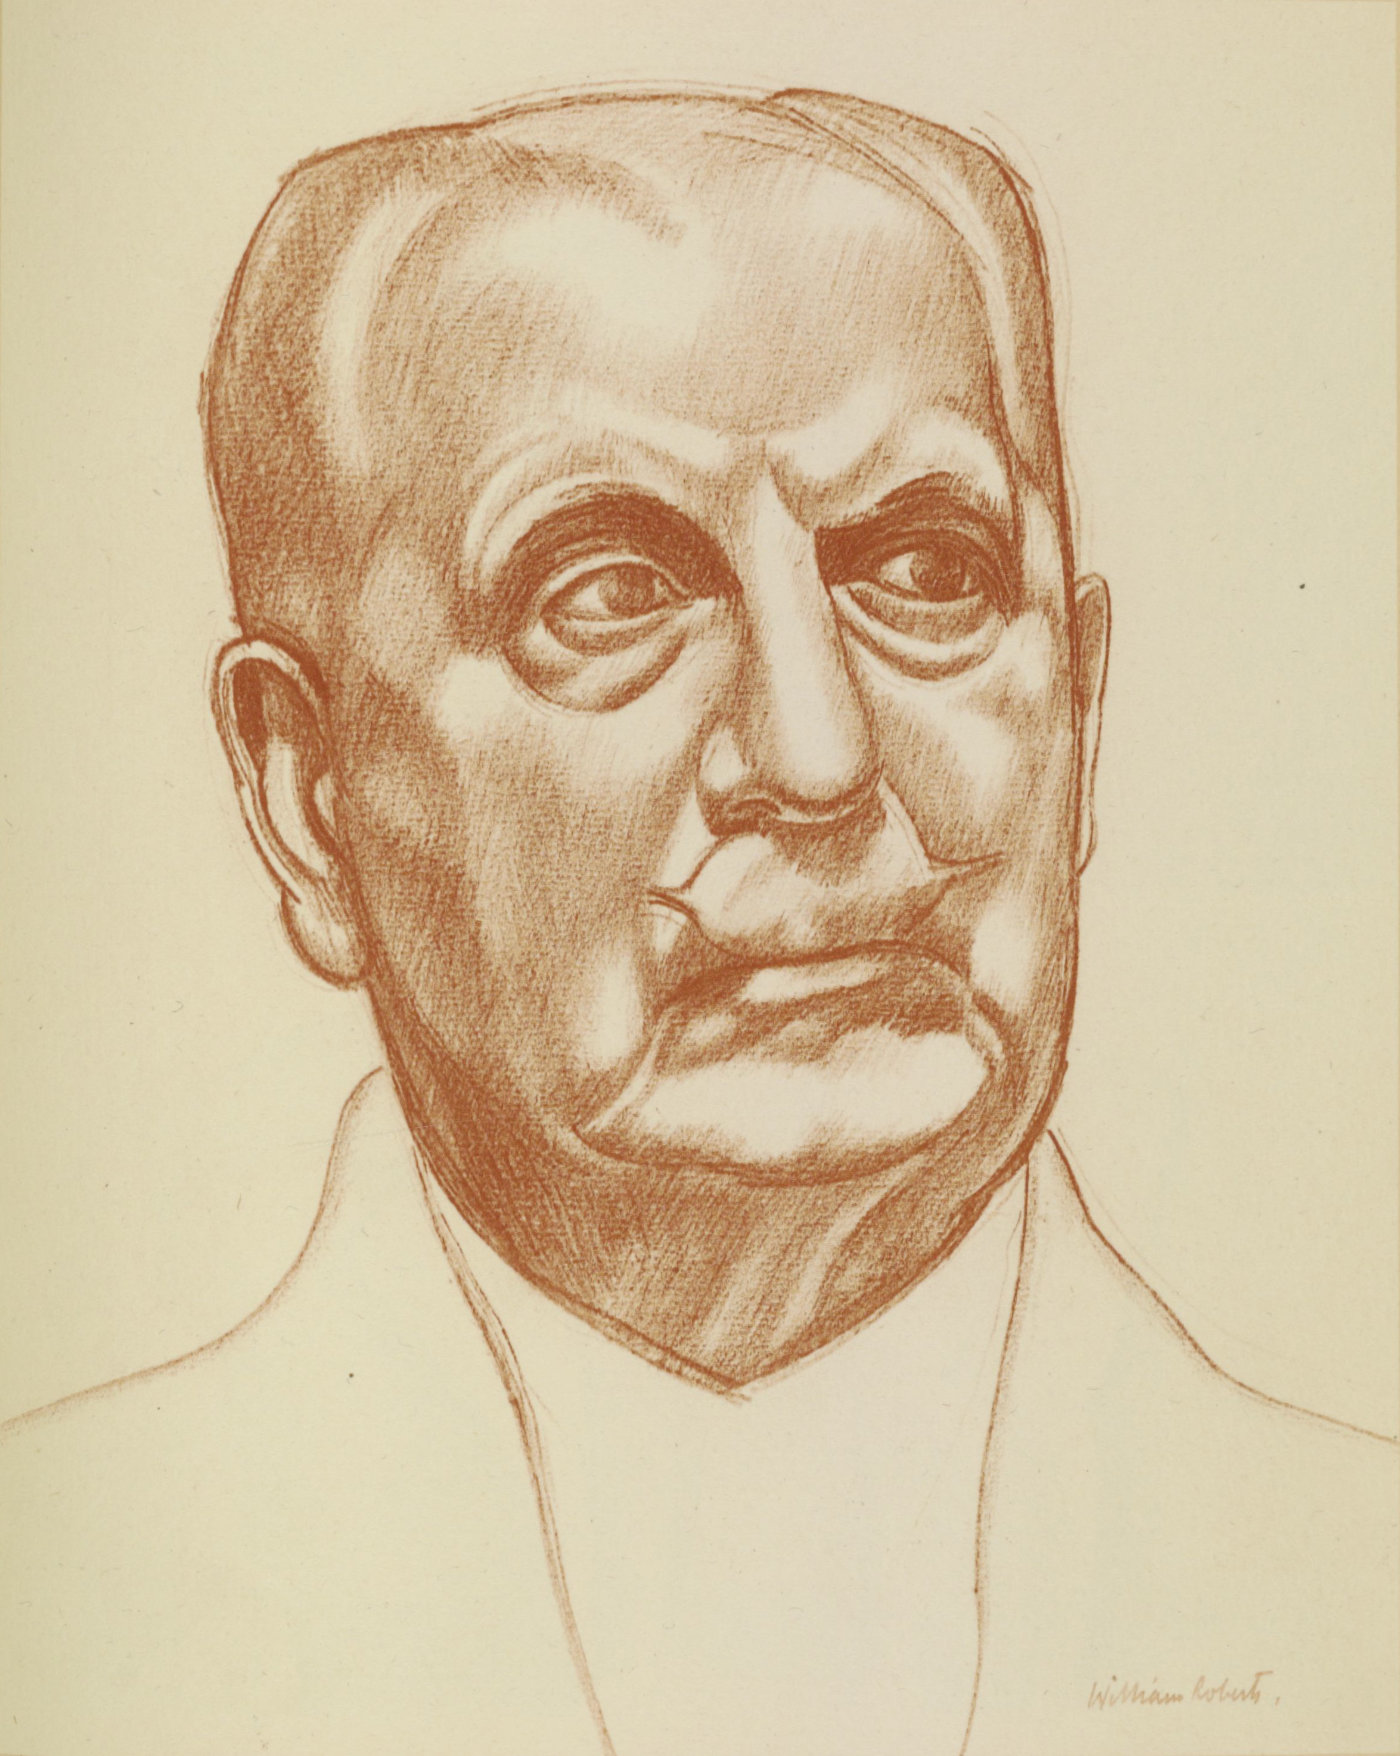 Chalk shoulder portrait of an older white male with dark eyes, white mustache, bald on top with short hair on sides, facing to his left.